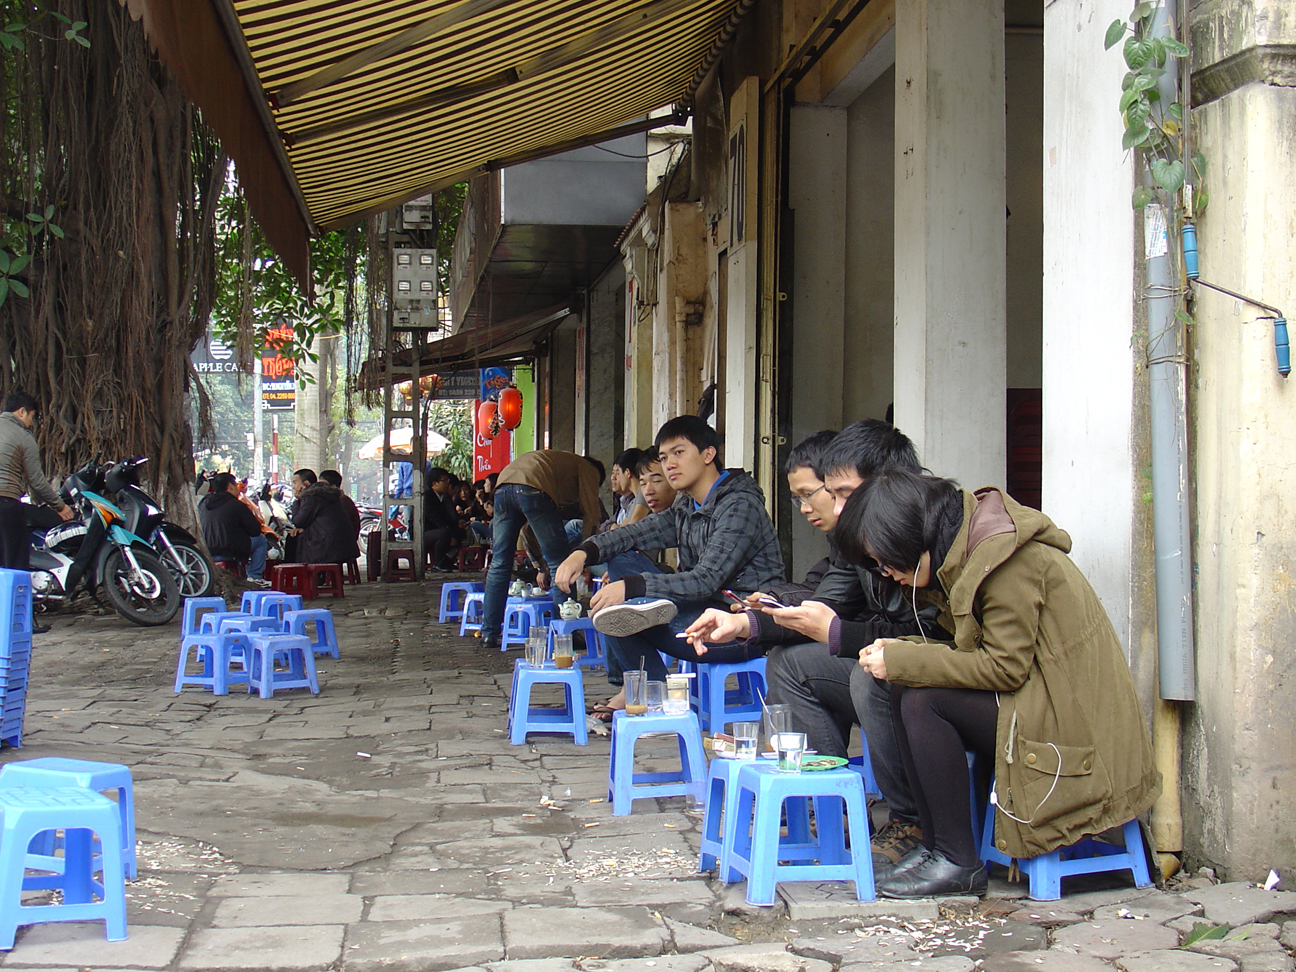 People drinking tea at the street in the morning.